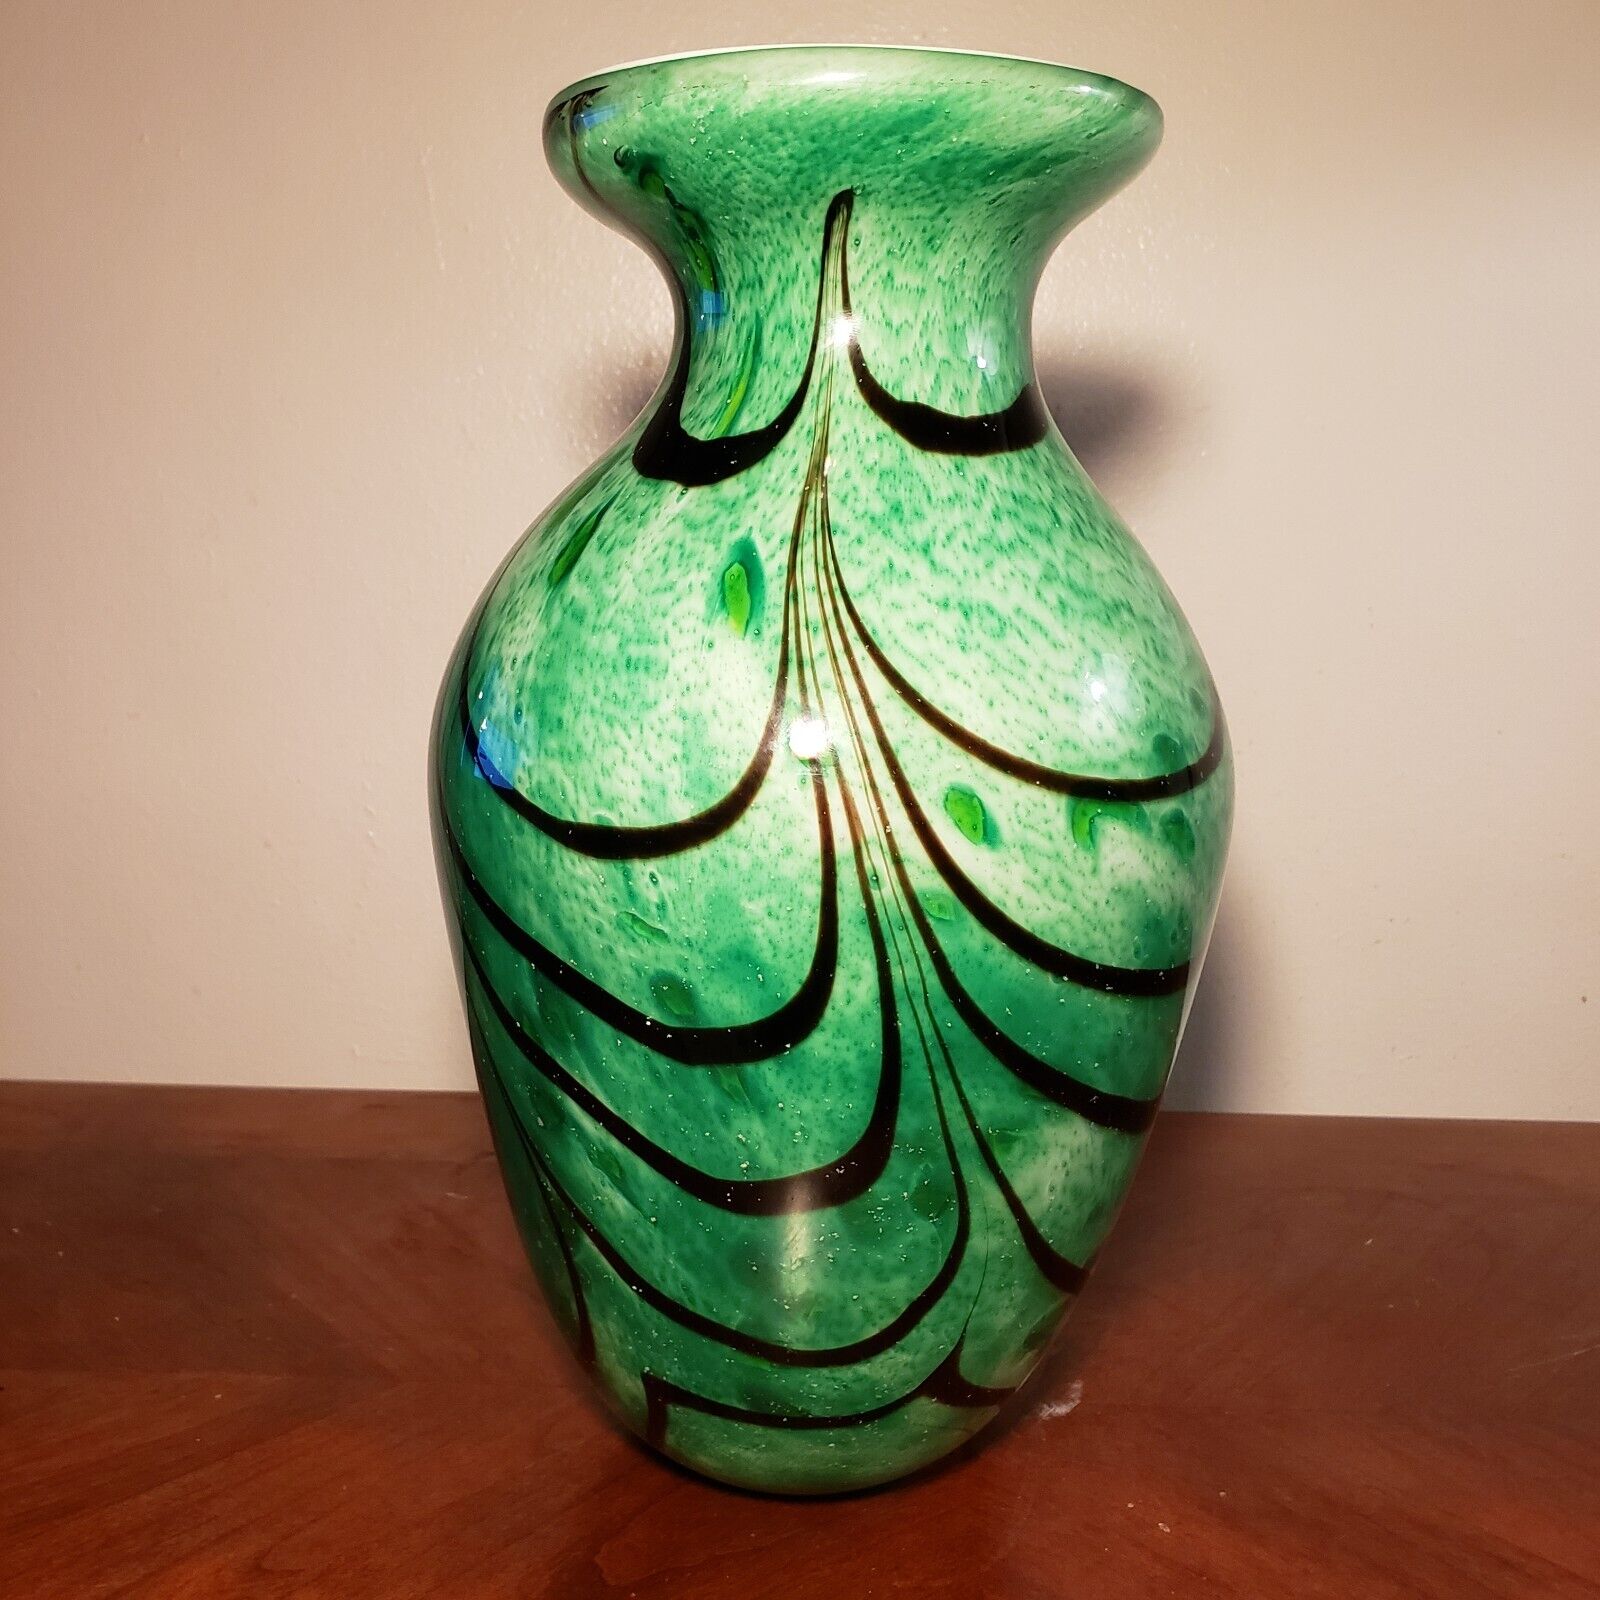 Vintage Large Heavy Murano Style Glass Vase 11 3/4 Inches Tall 8 Lb 3.5 Oz